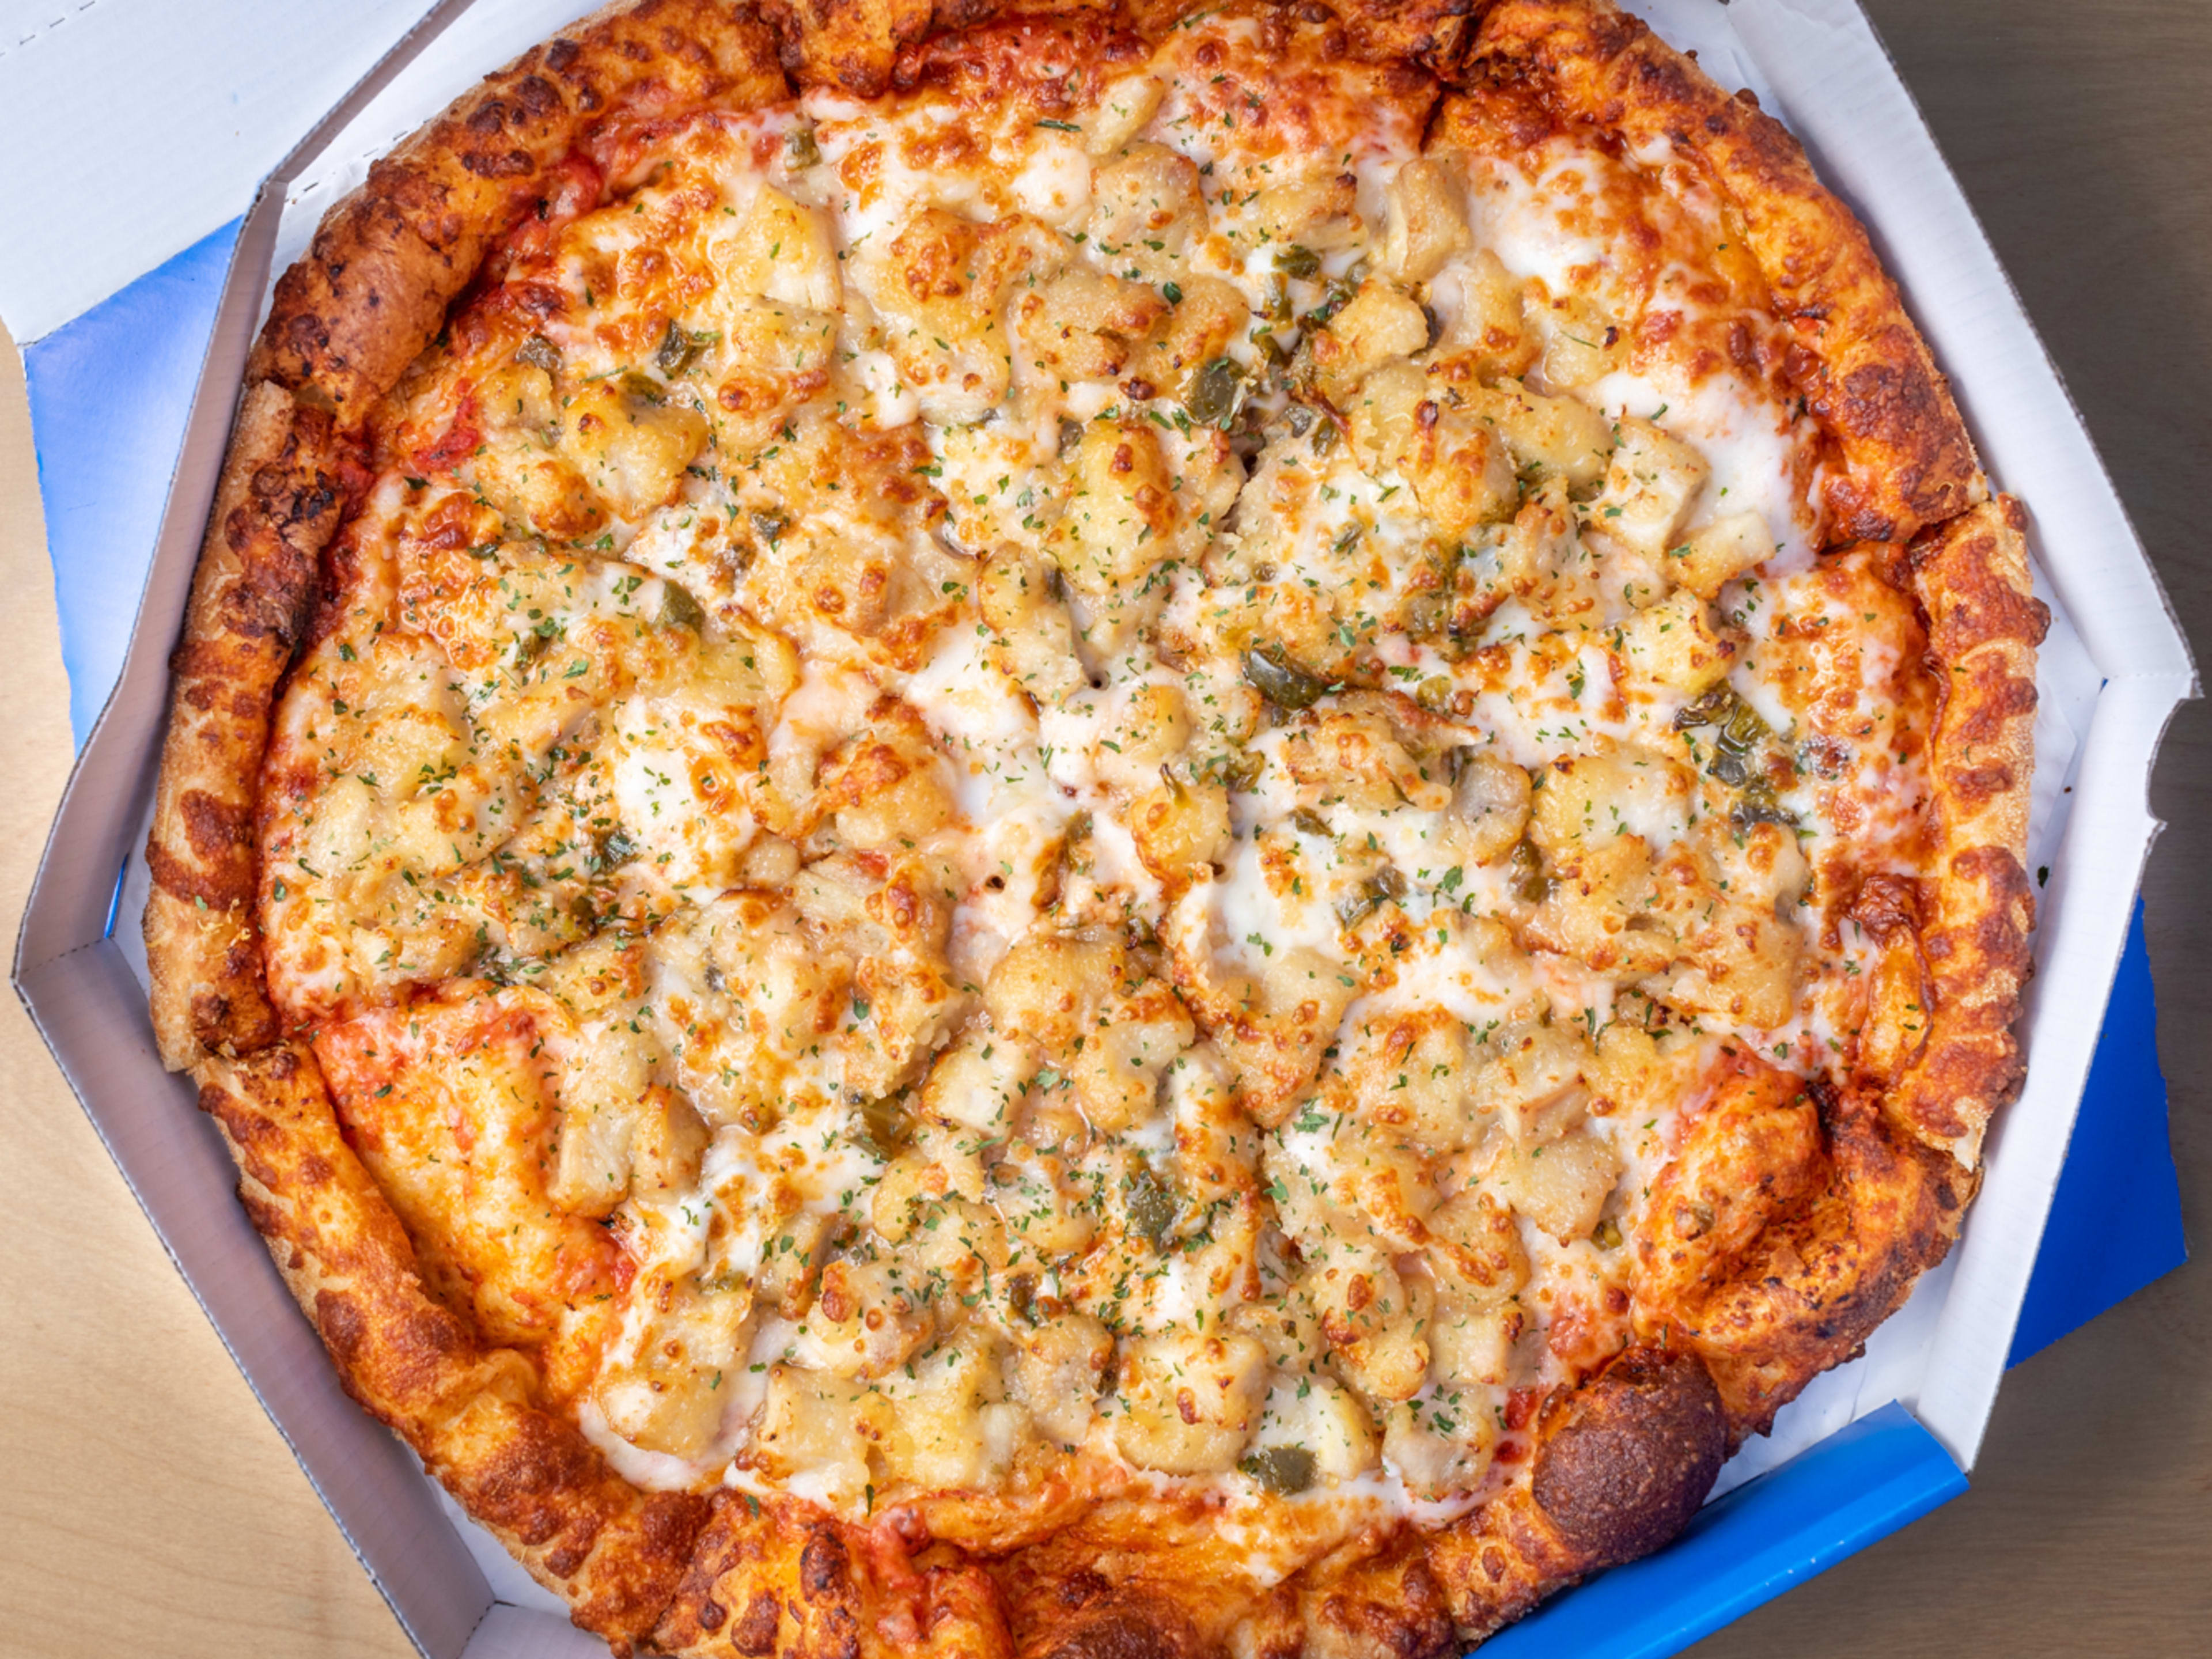 The garlic chicken pizza from Thanks Pizza.